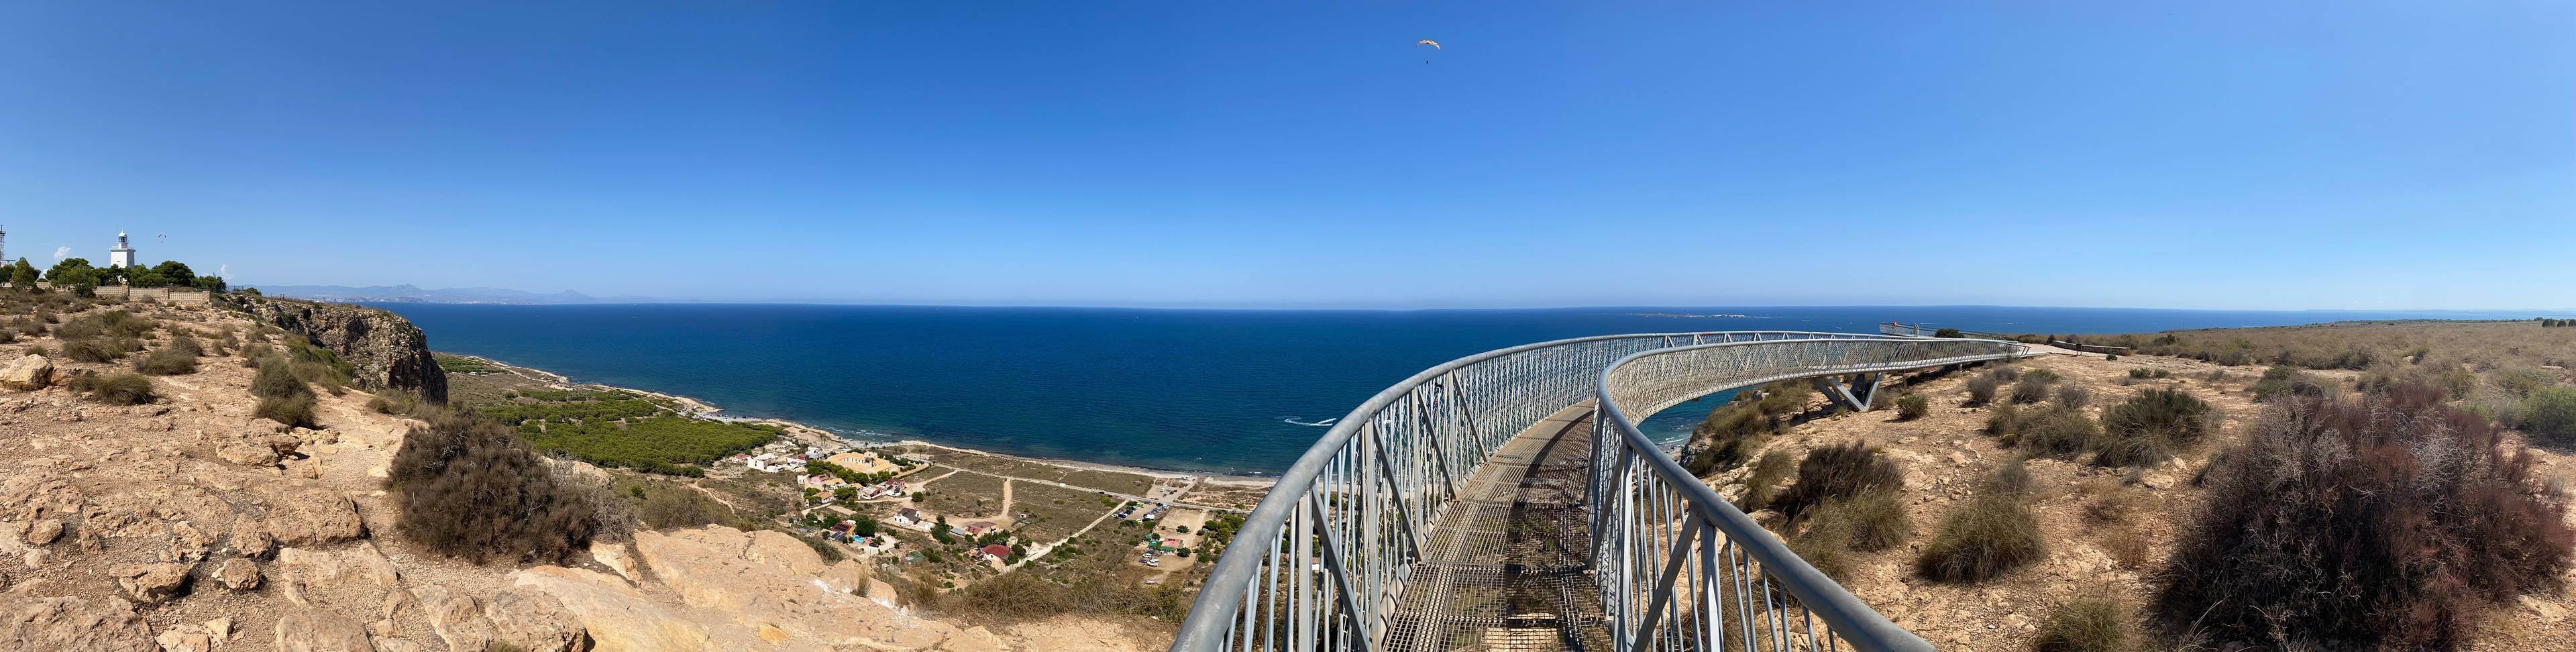 Lookout of the Santa Pola Lighthouse